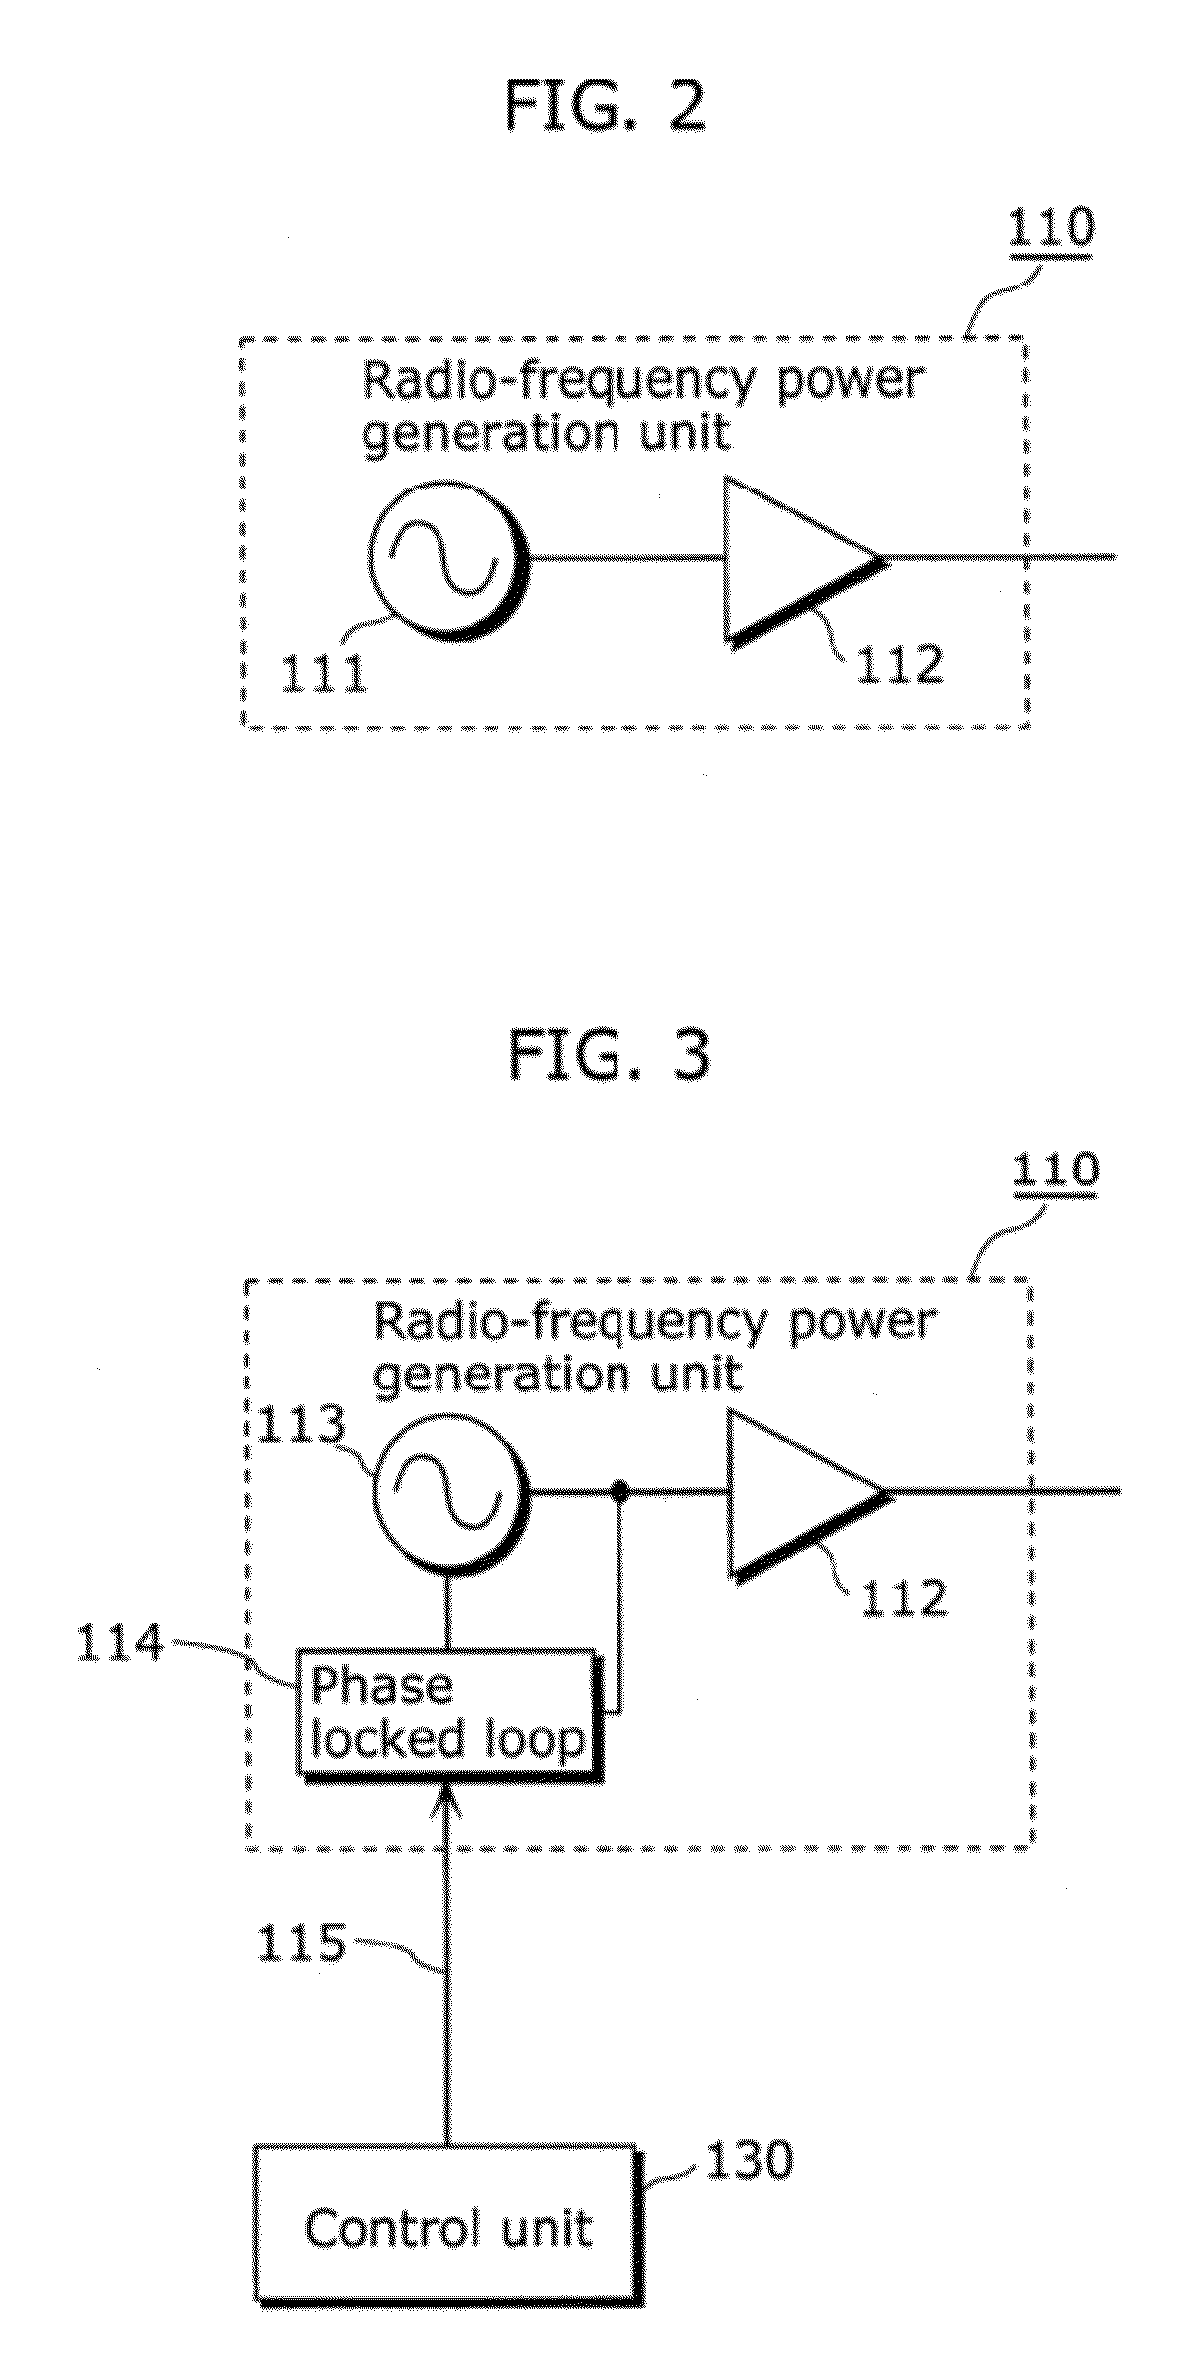 Radio-frequency heating apparatus and radio-frequency heating method